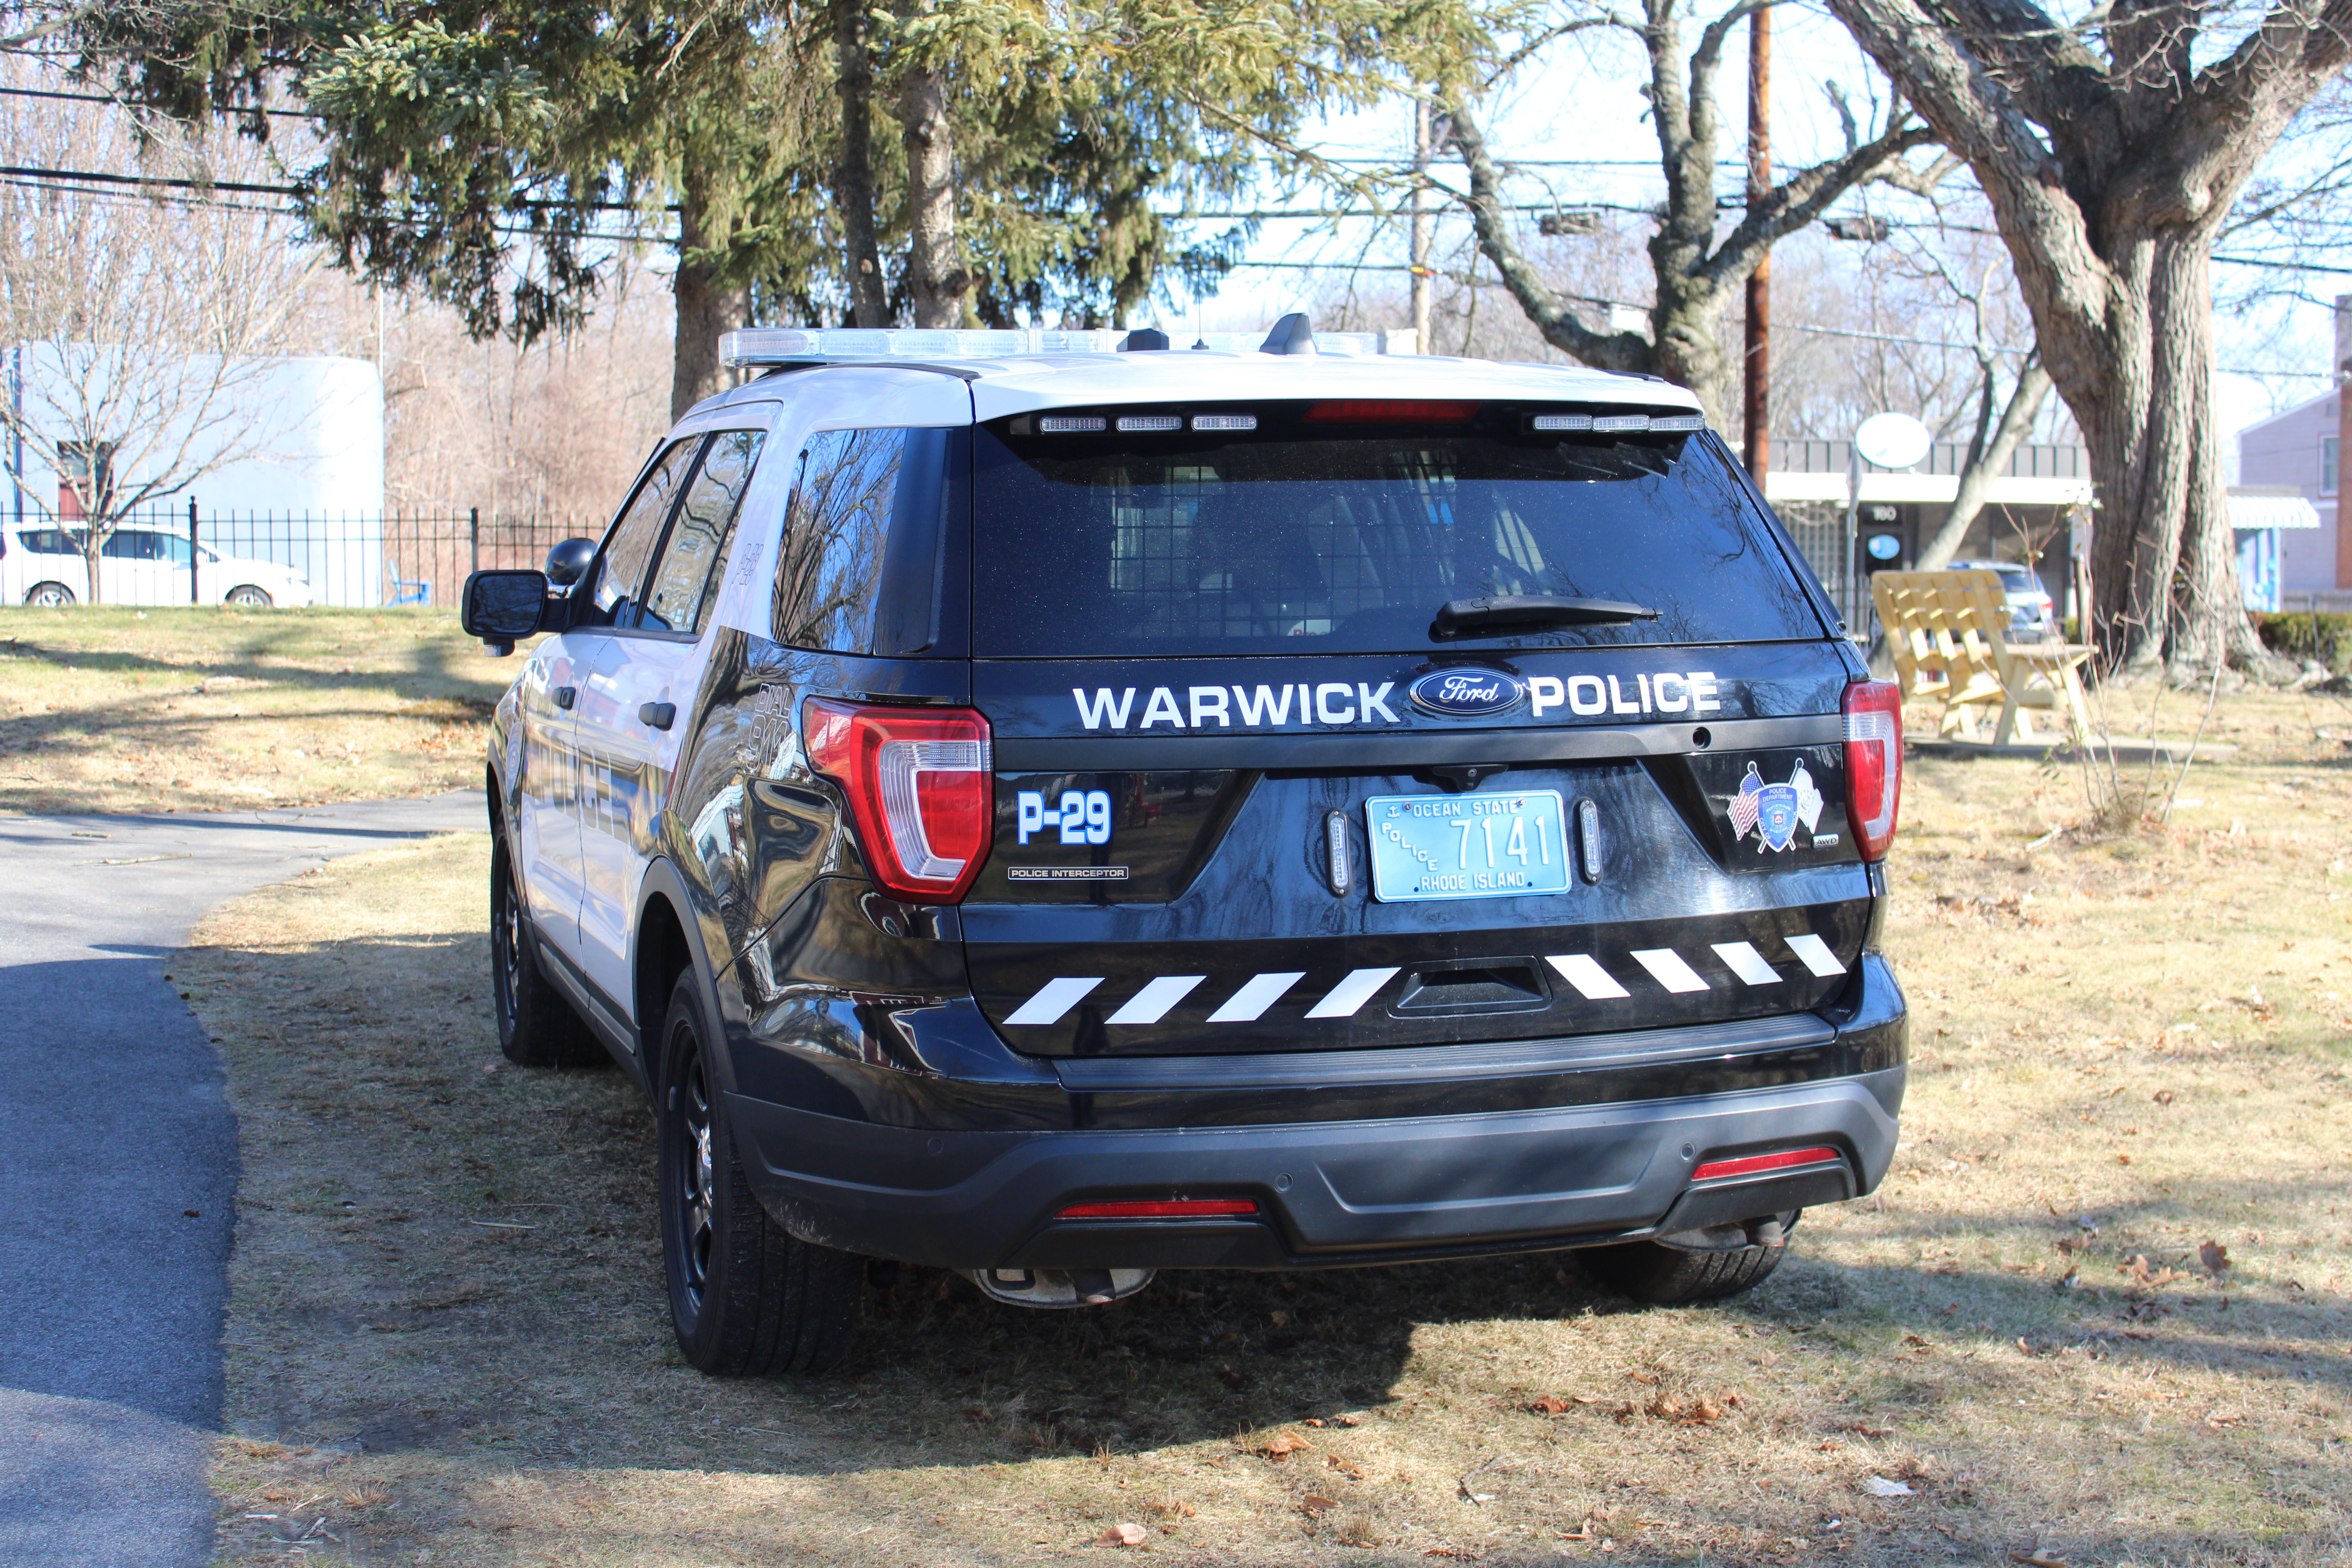 A photo  of Warwick Police
            Cruiser P-29, a 2019 Ford Police Interceptor Utility             taken by @riemergencyvehicles